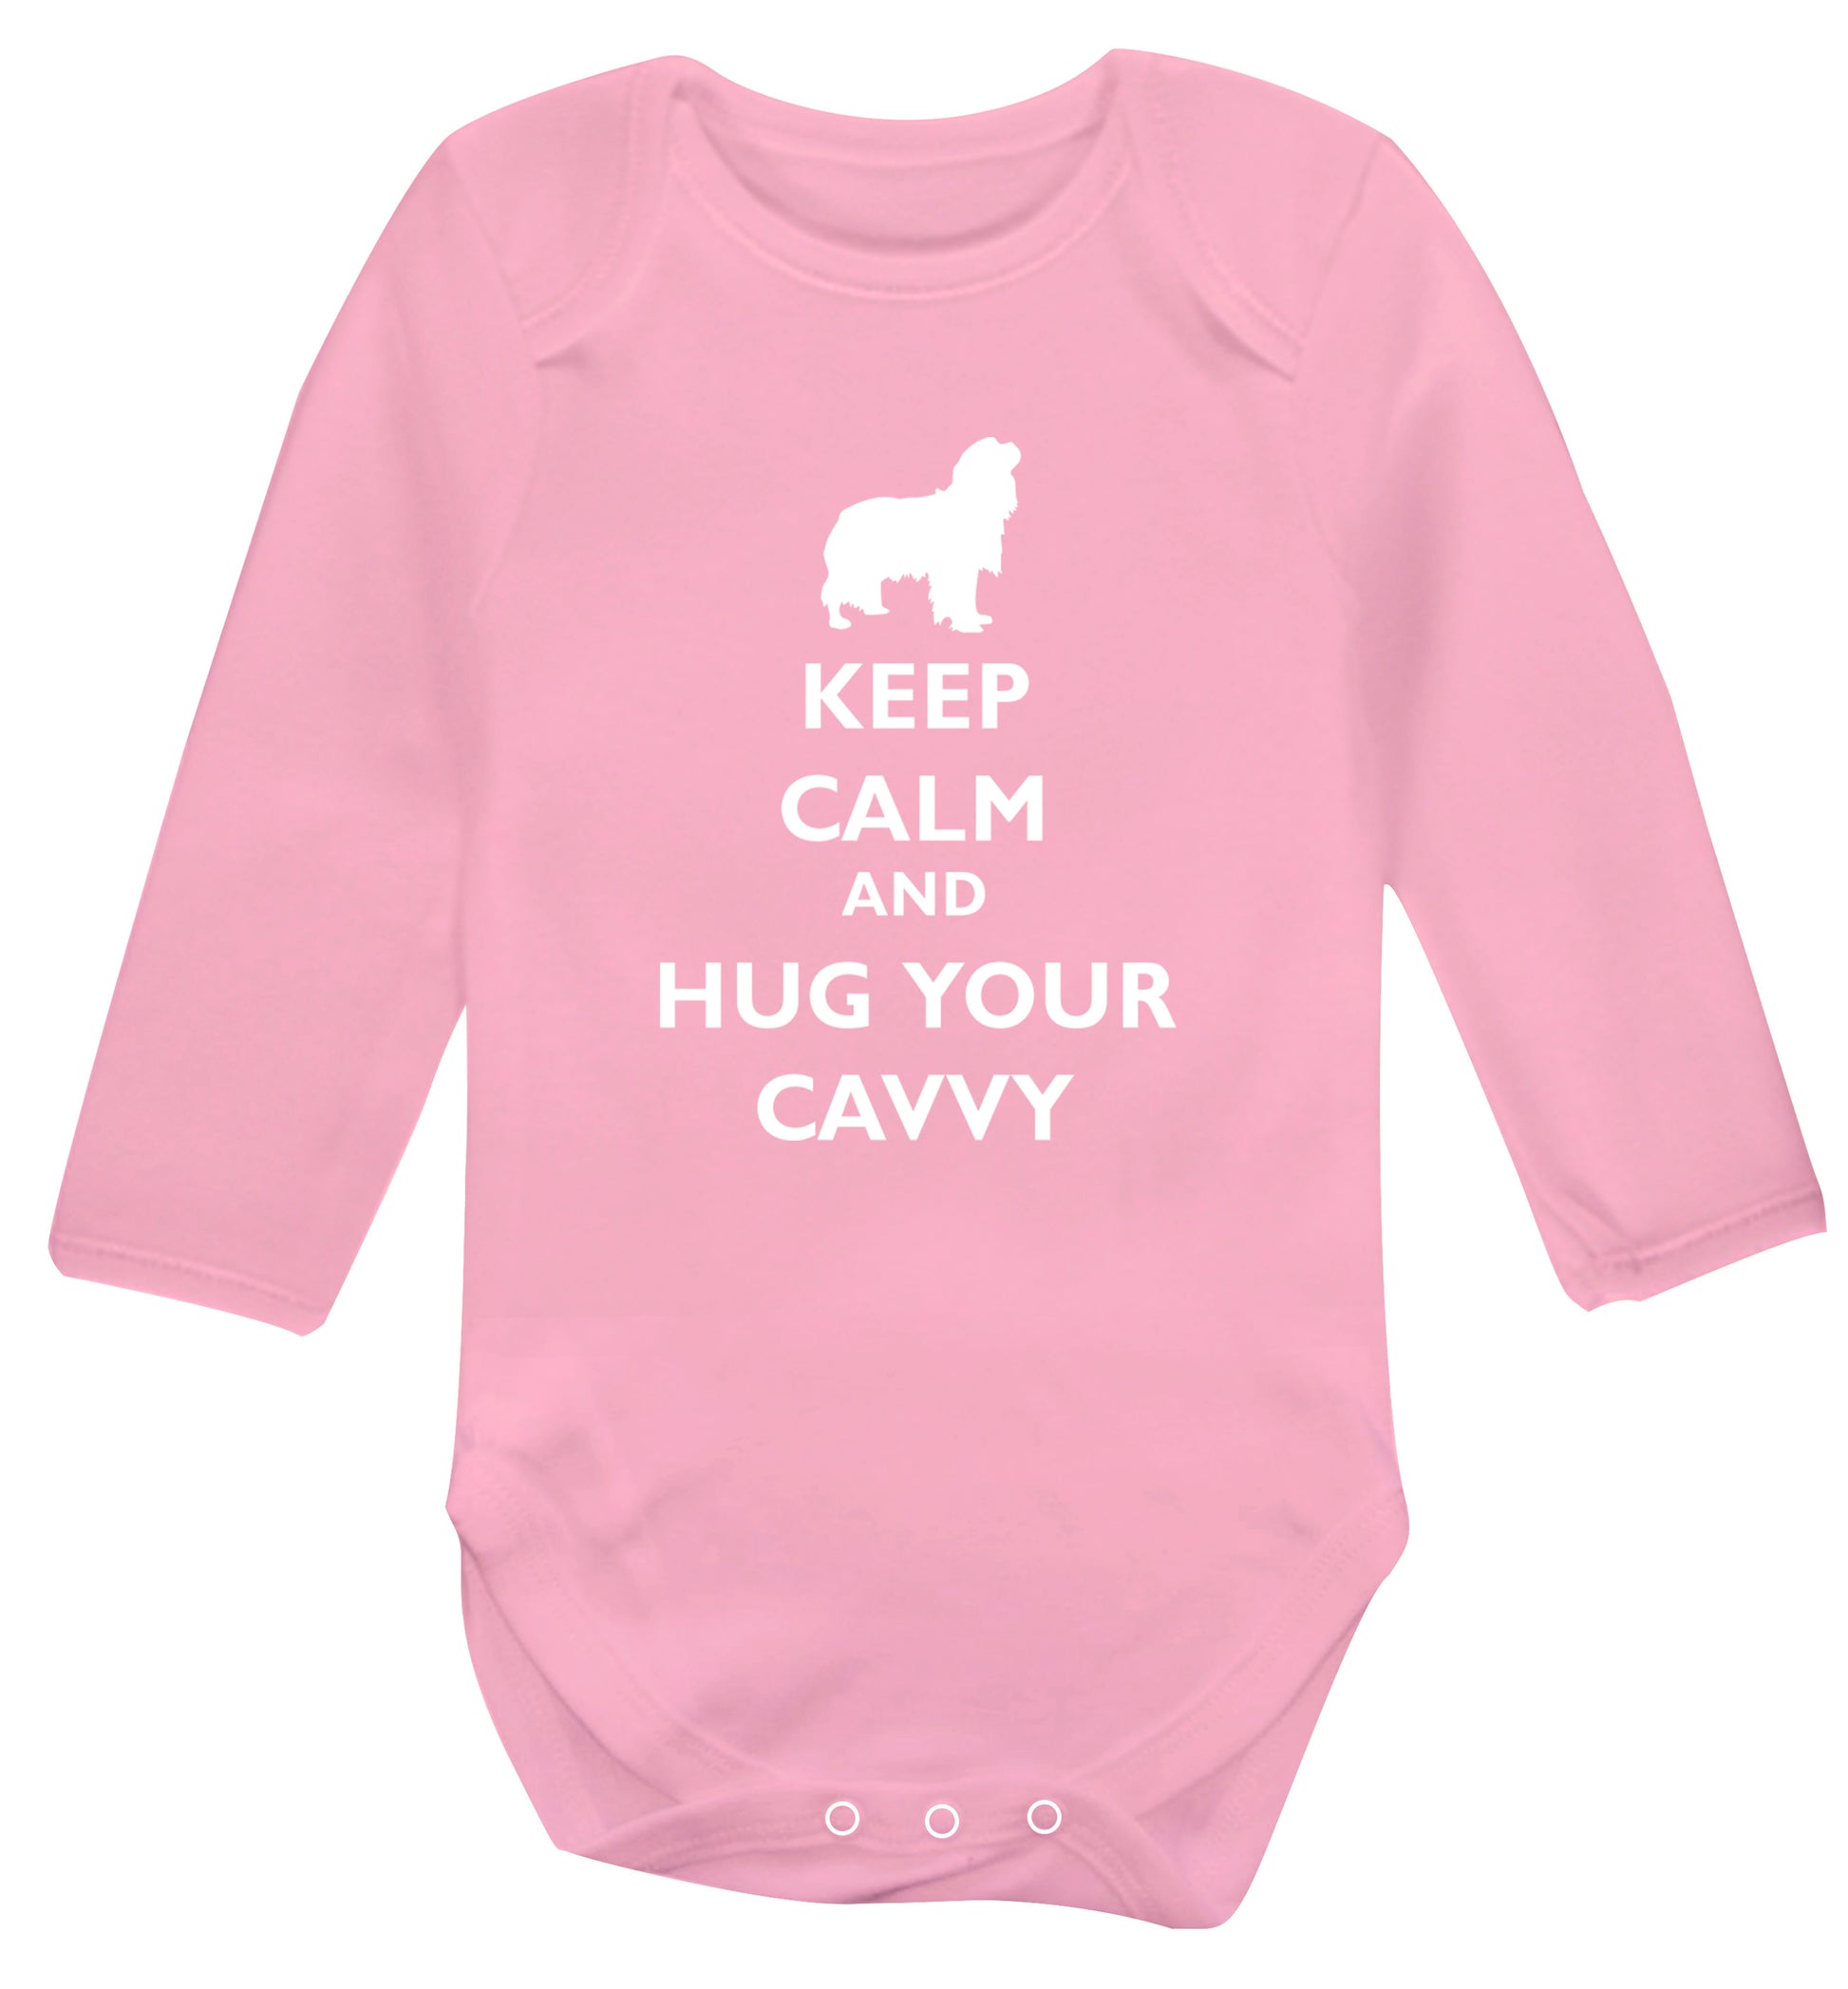 Keep calm and hug your cavvy Baby Vest long sleeved pale pink 6-12 months